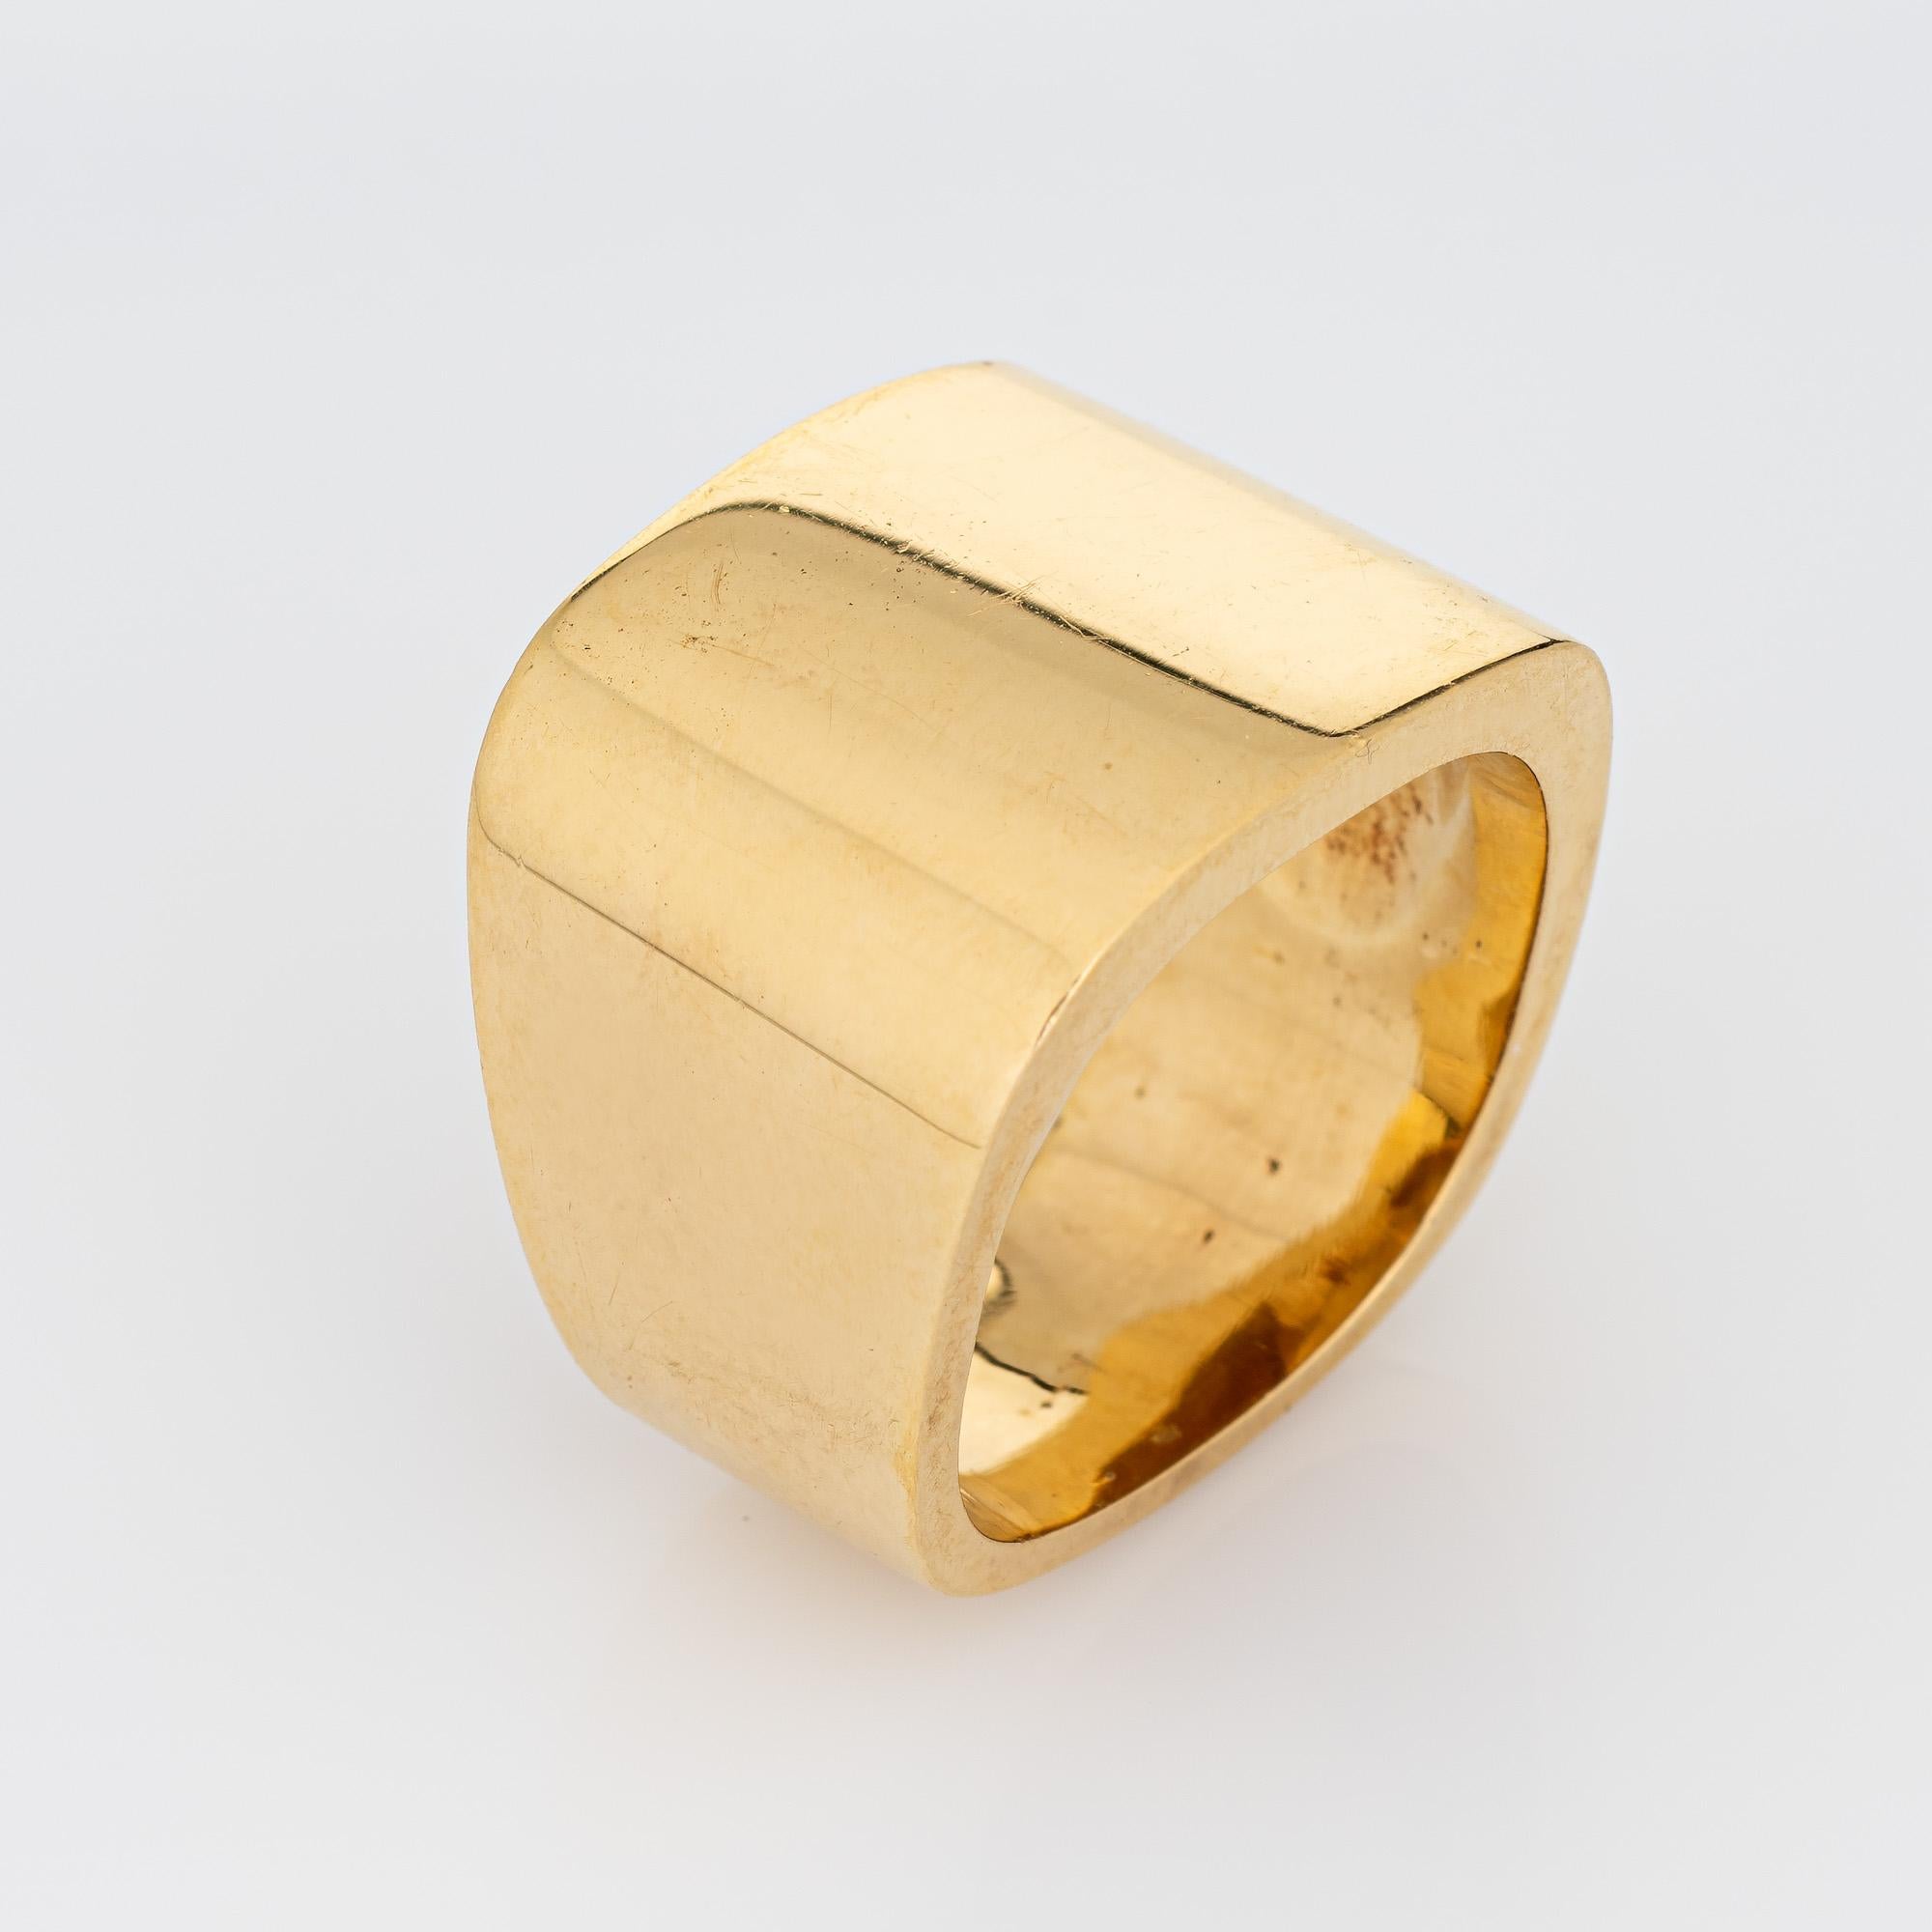 Stylish vintage 18k gold square signet cuff ring (circa 1980s).

The beautifully crafted ring highlights a distinct square design. The ring has a weighty feel (19.5 grams) and makes a great statement on the hand. The wide band (17mm - 0.66 inches)